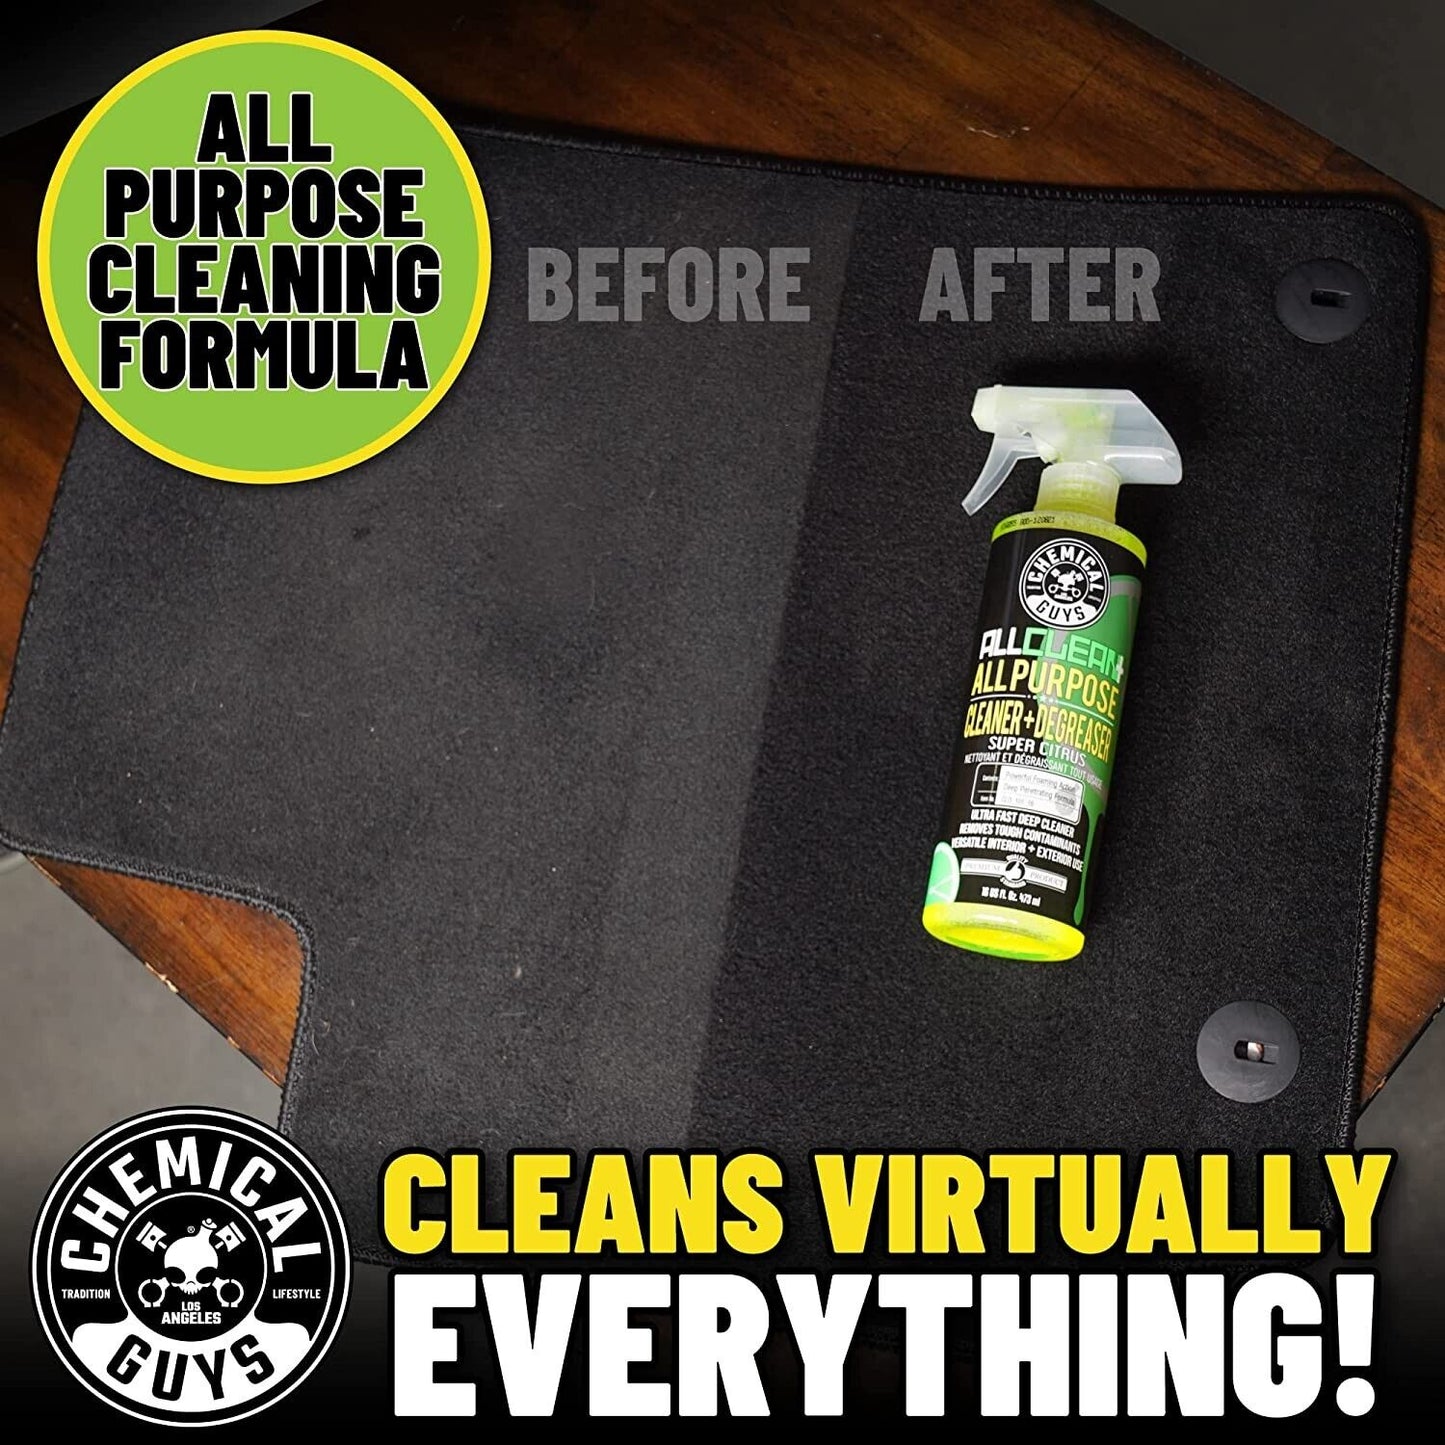 Chemical Guys All Clean+ Citrus Base All Purpose Cleaner (16 Fl. Oz.)